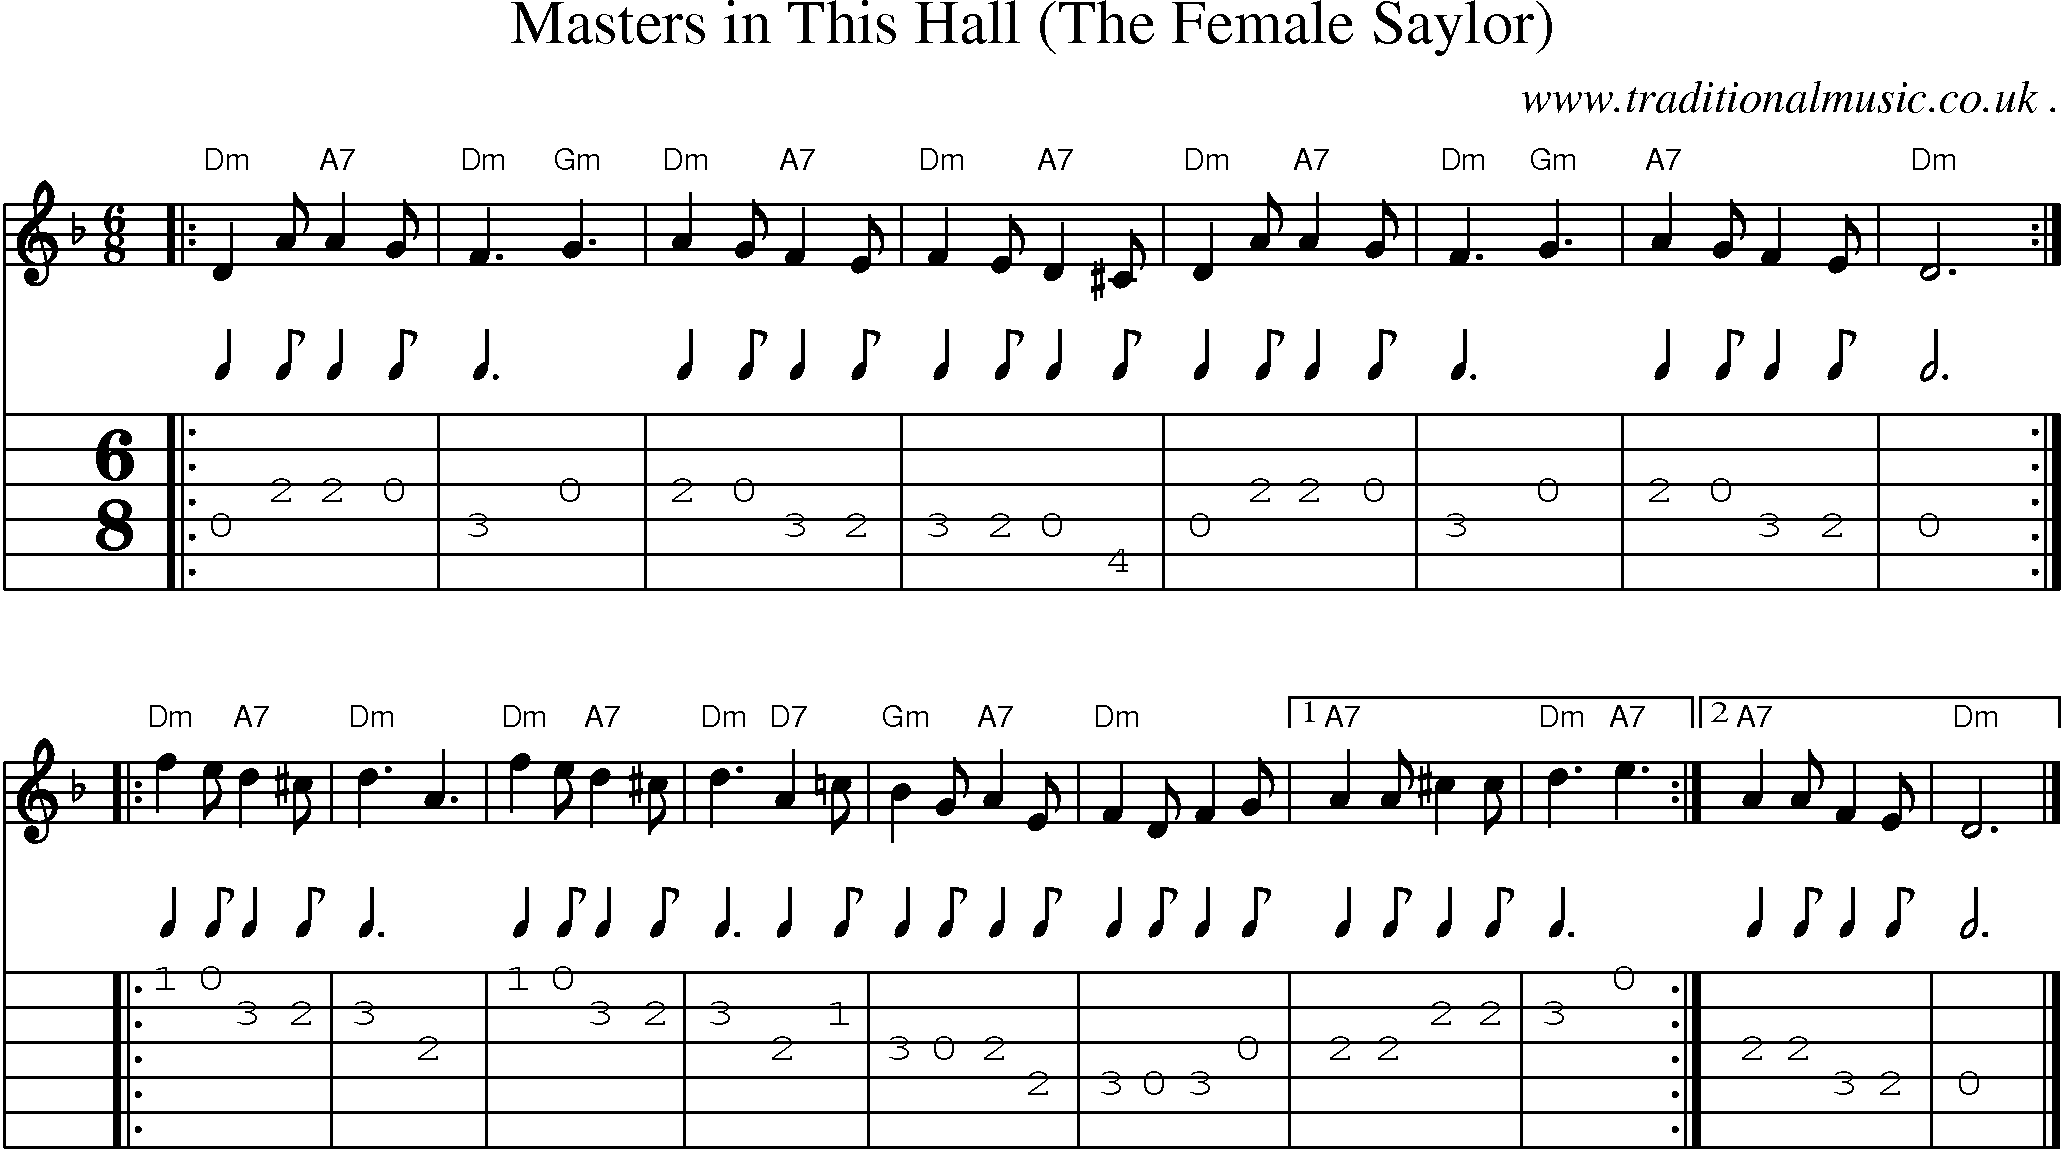 Sheet-music  score, Chords and Guitar Tabs for Masters In This Hall The Female Saylor